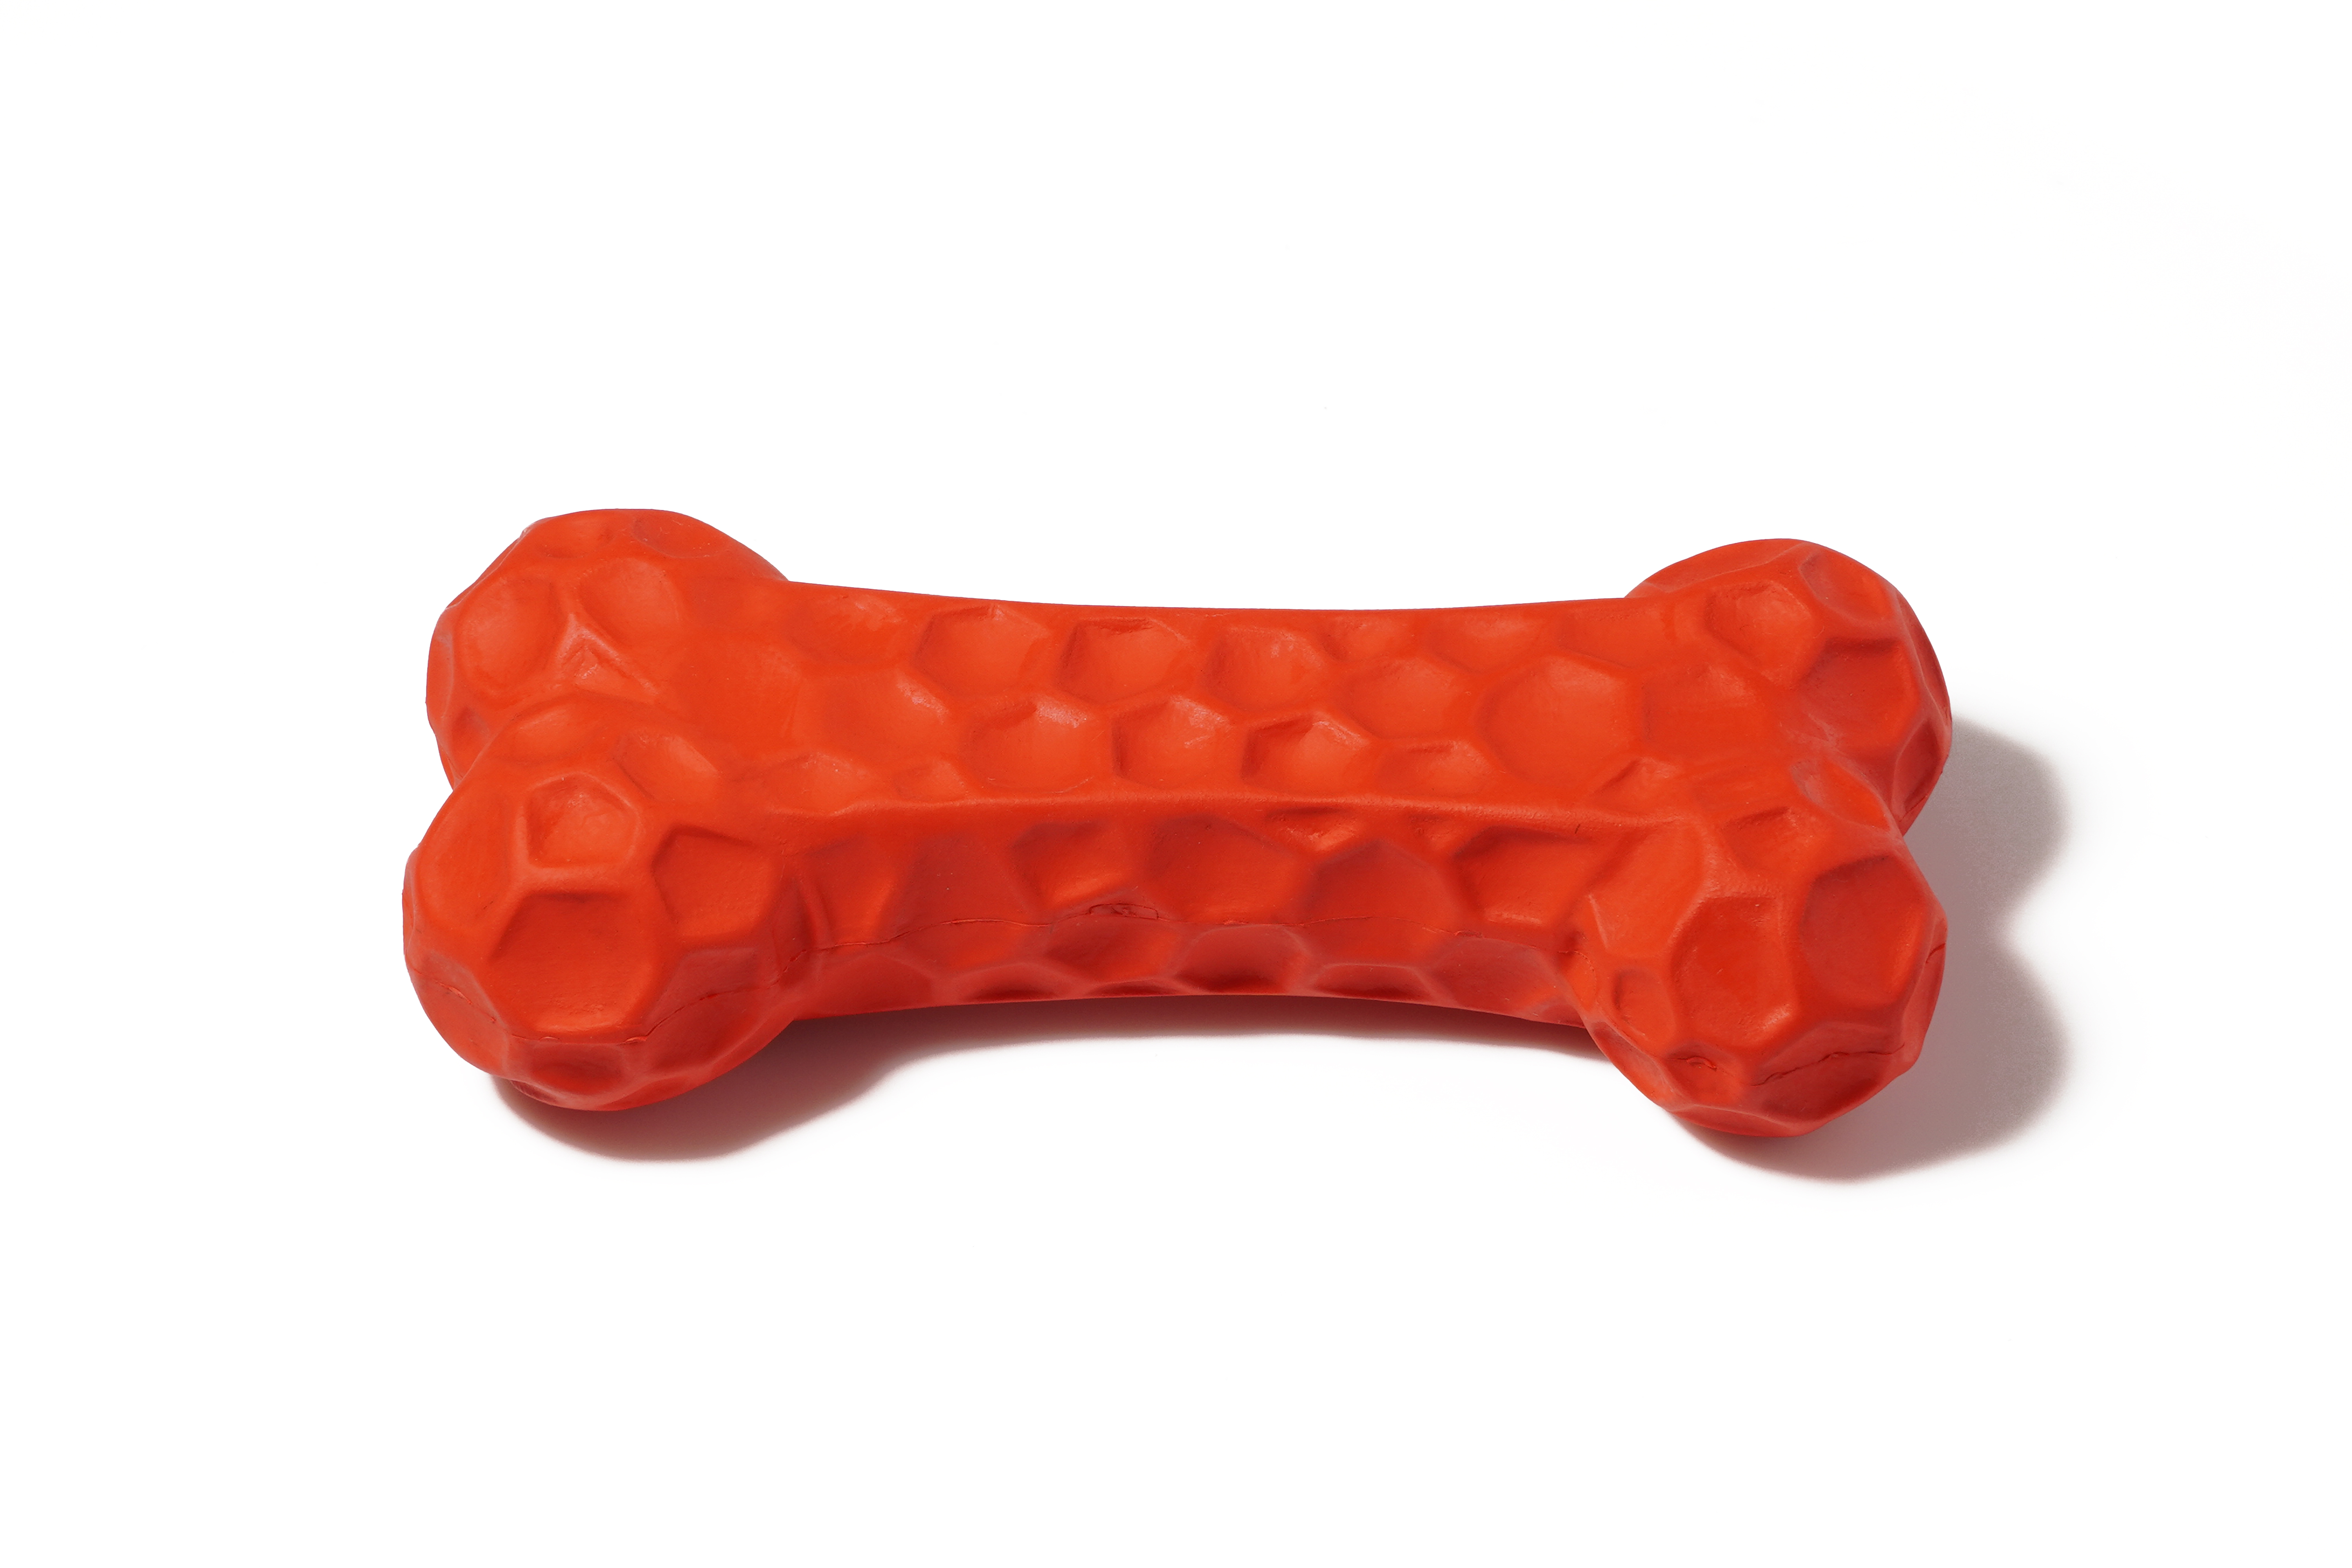 rubber dog toy